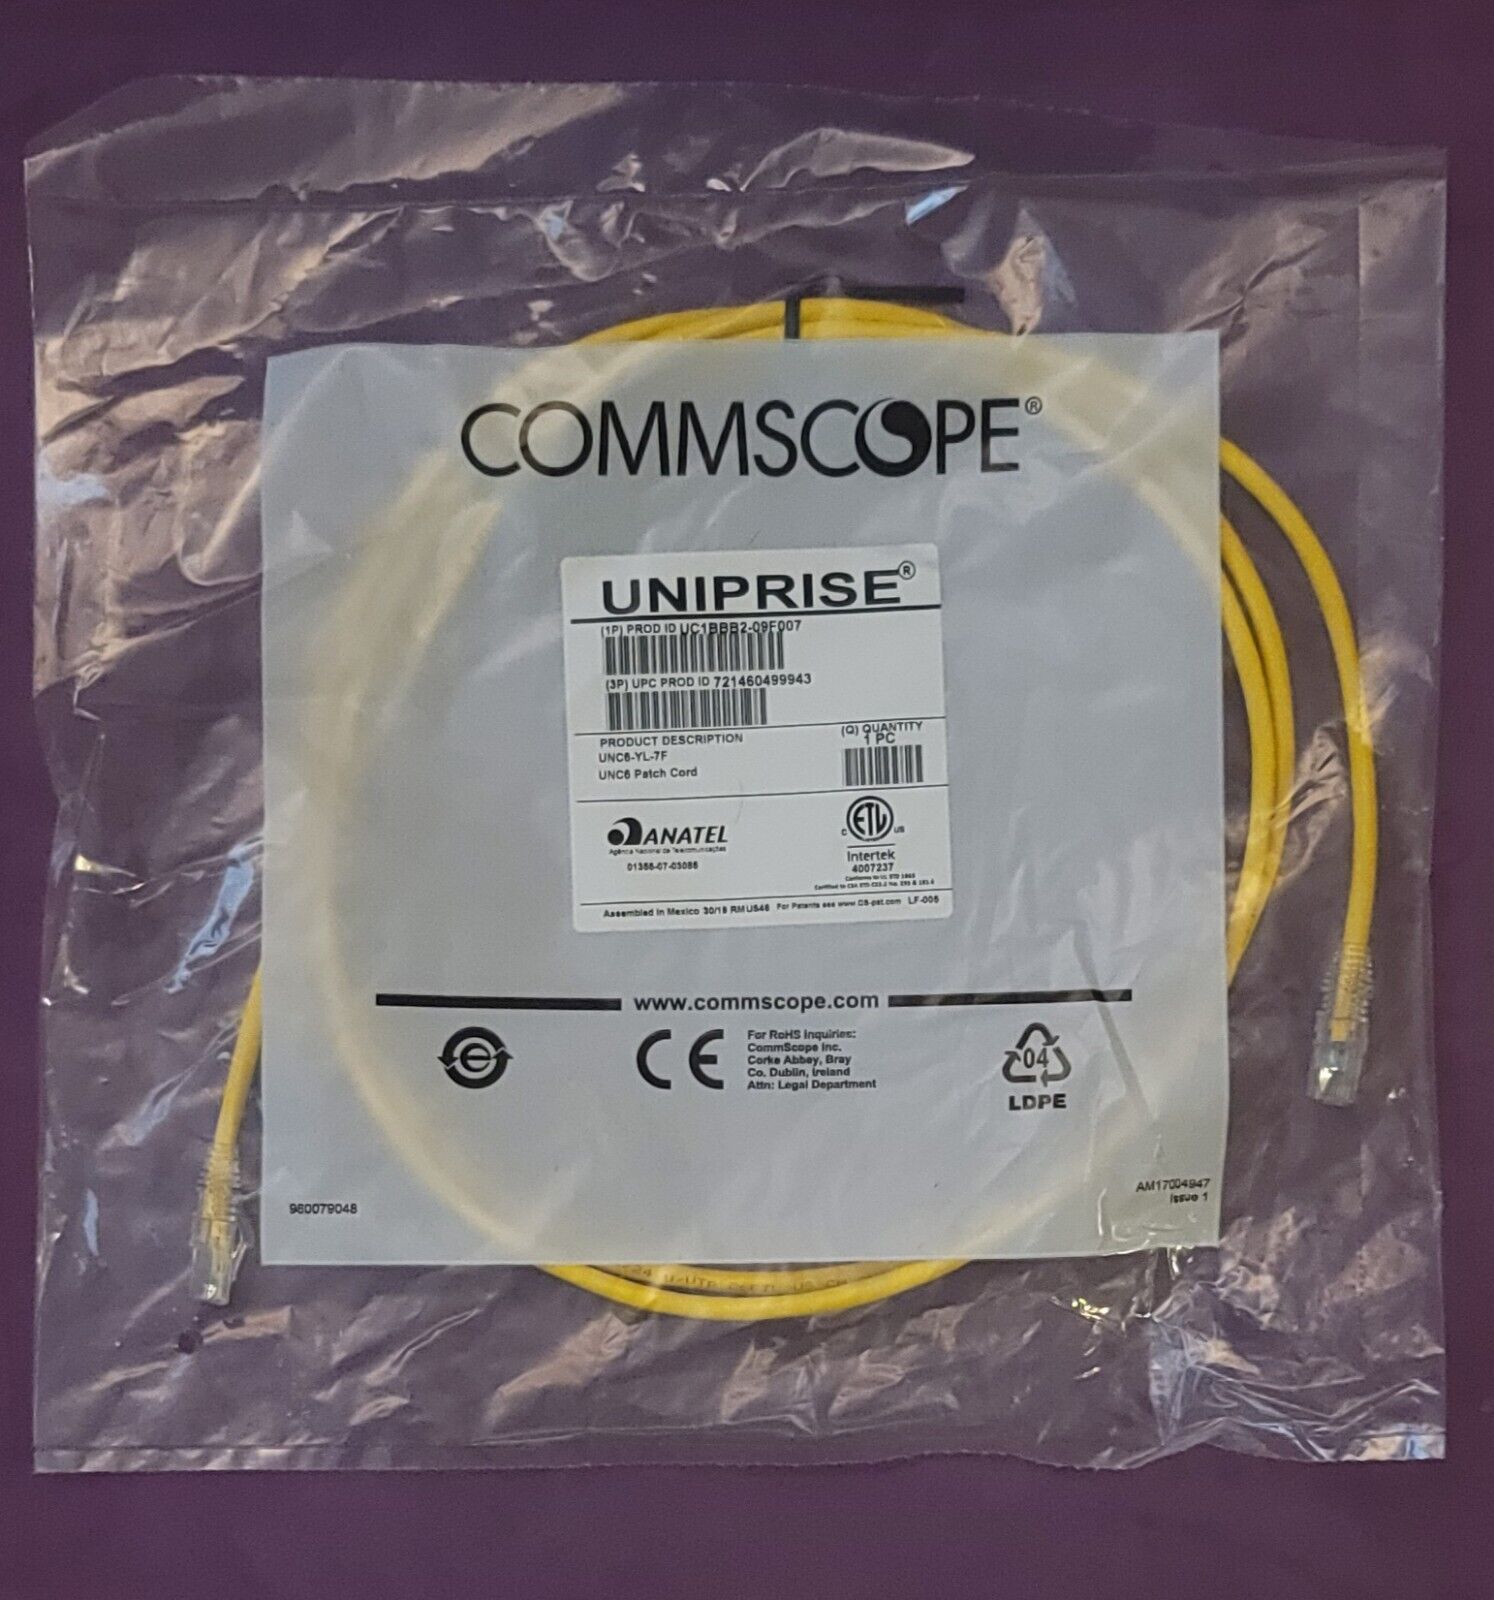 (5) COMMSCOPE UNIPRISE SOLUTIONS | UC1BBB2-09F007 CAT6 PATCH CORD 7FT *NEW*